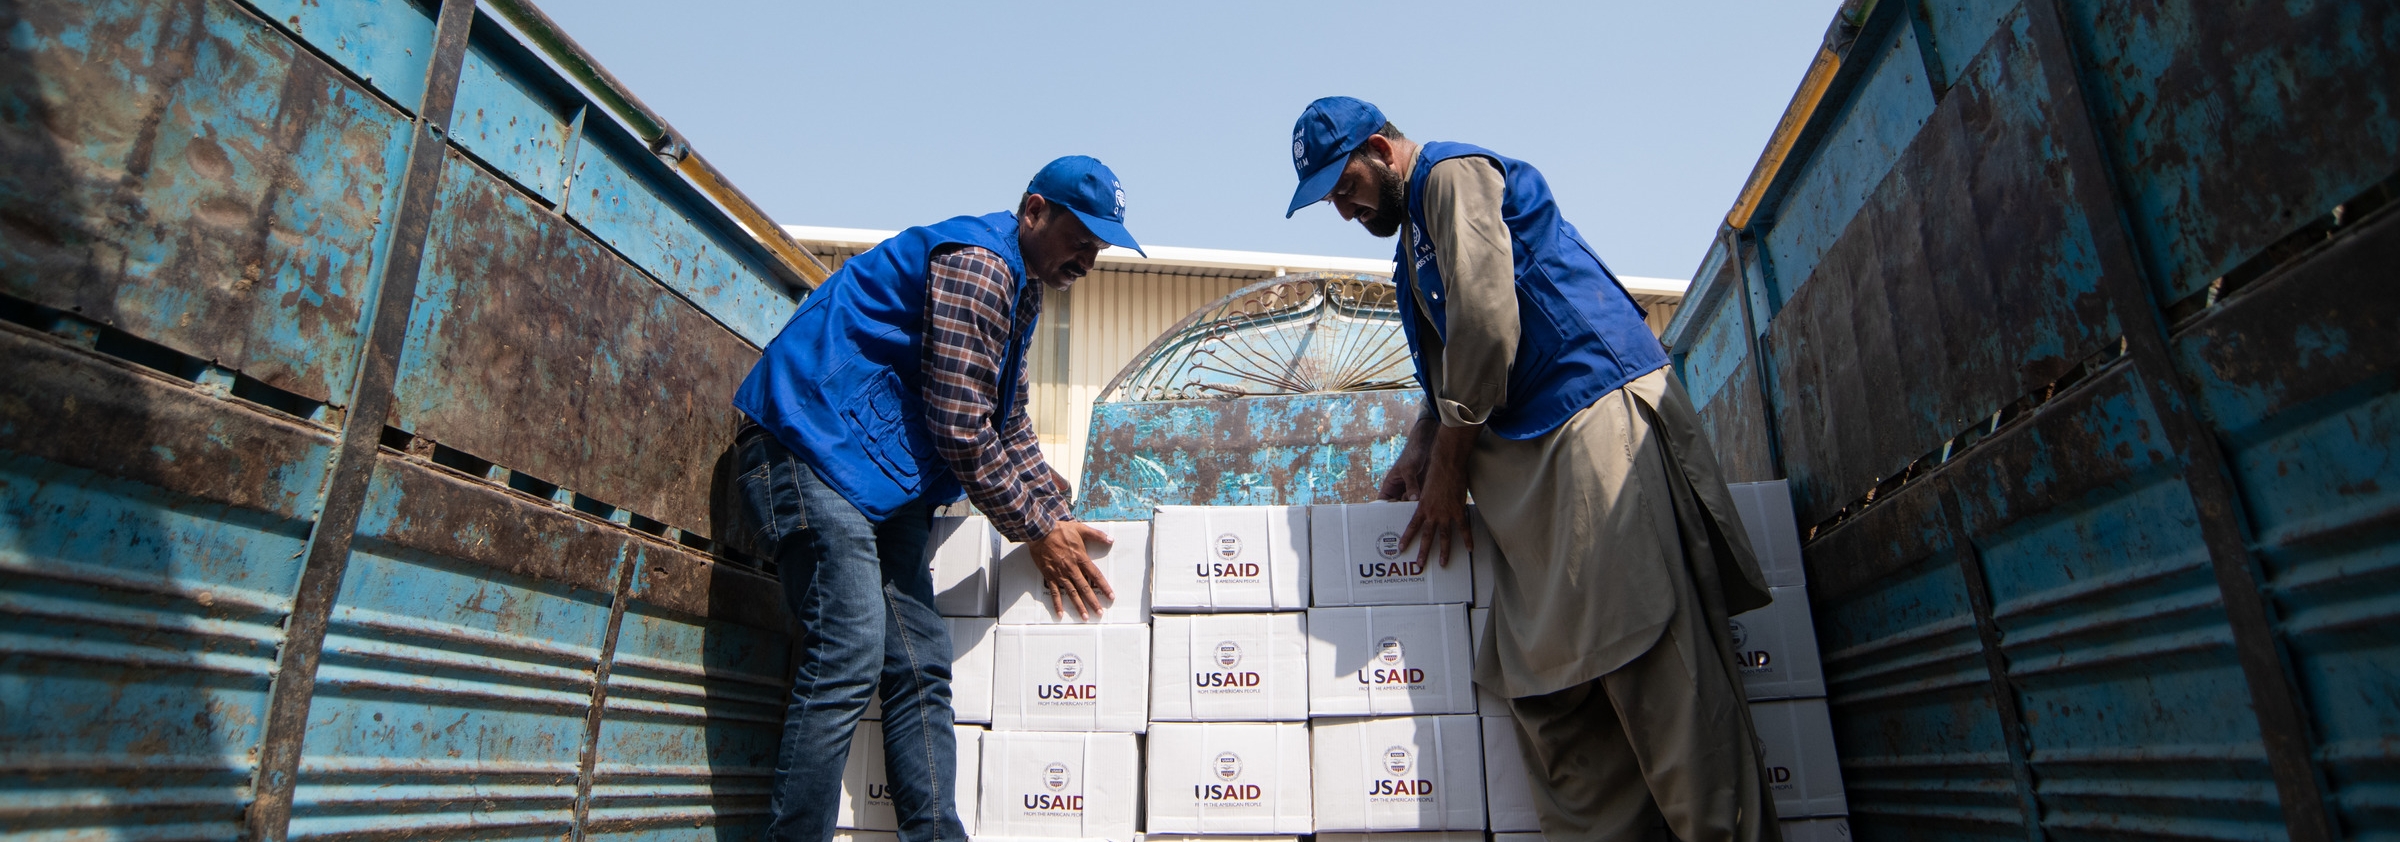 Loading of shelter and NFI kits to respond to the Pakistan floods. © IOM Pakistan 2022